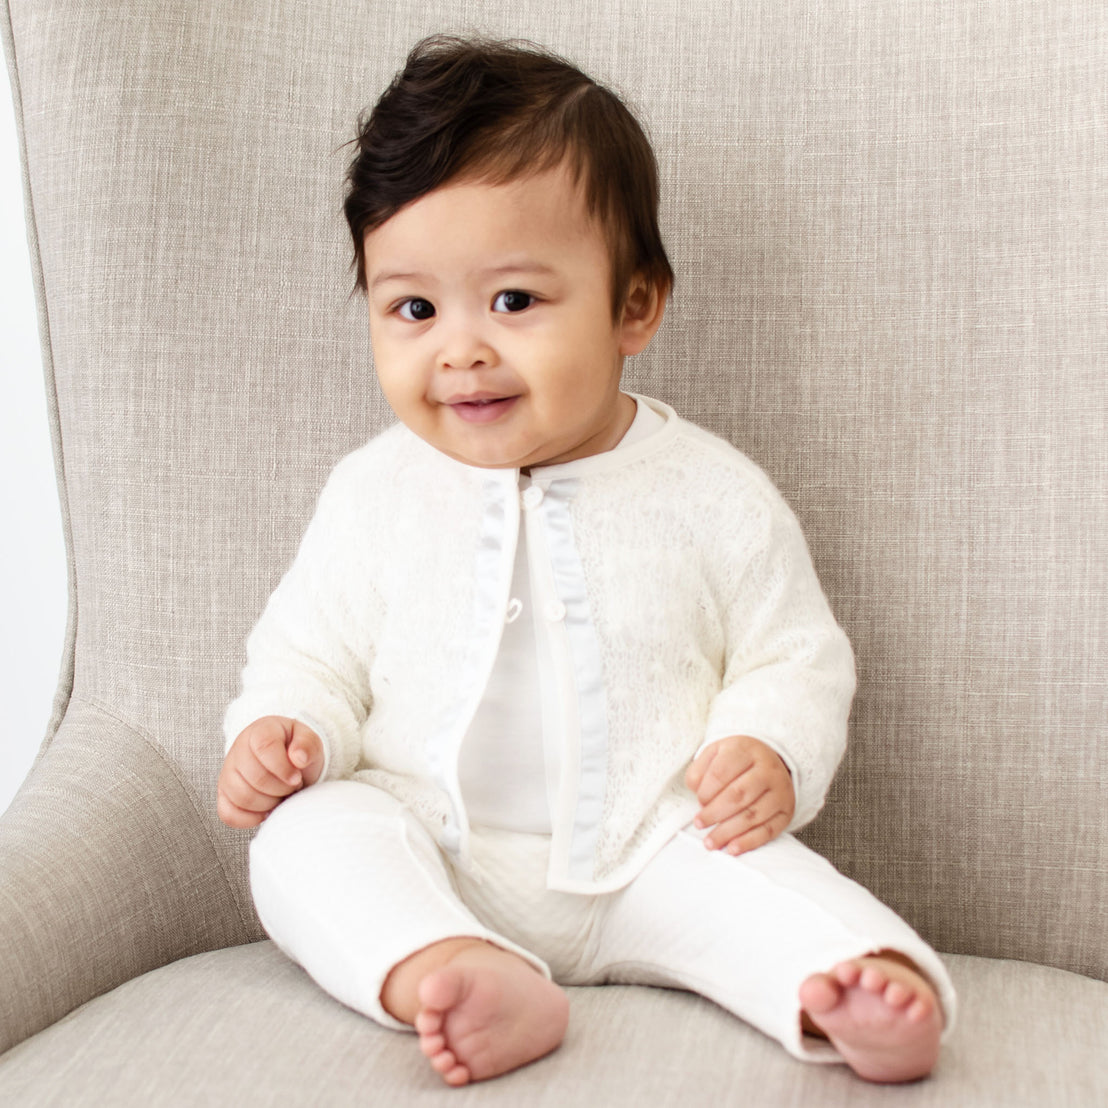 Baby boy sitting on a chair and wearing the Owen 3-Piece Suit, including the sweater, pants, and onesie